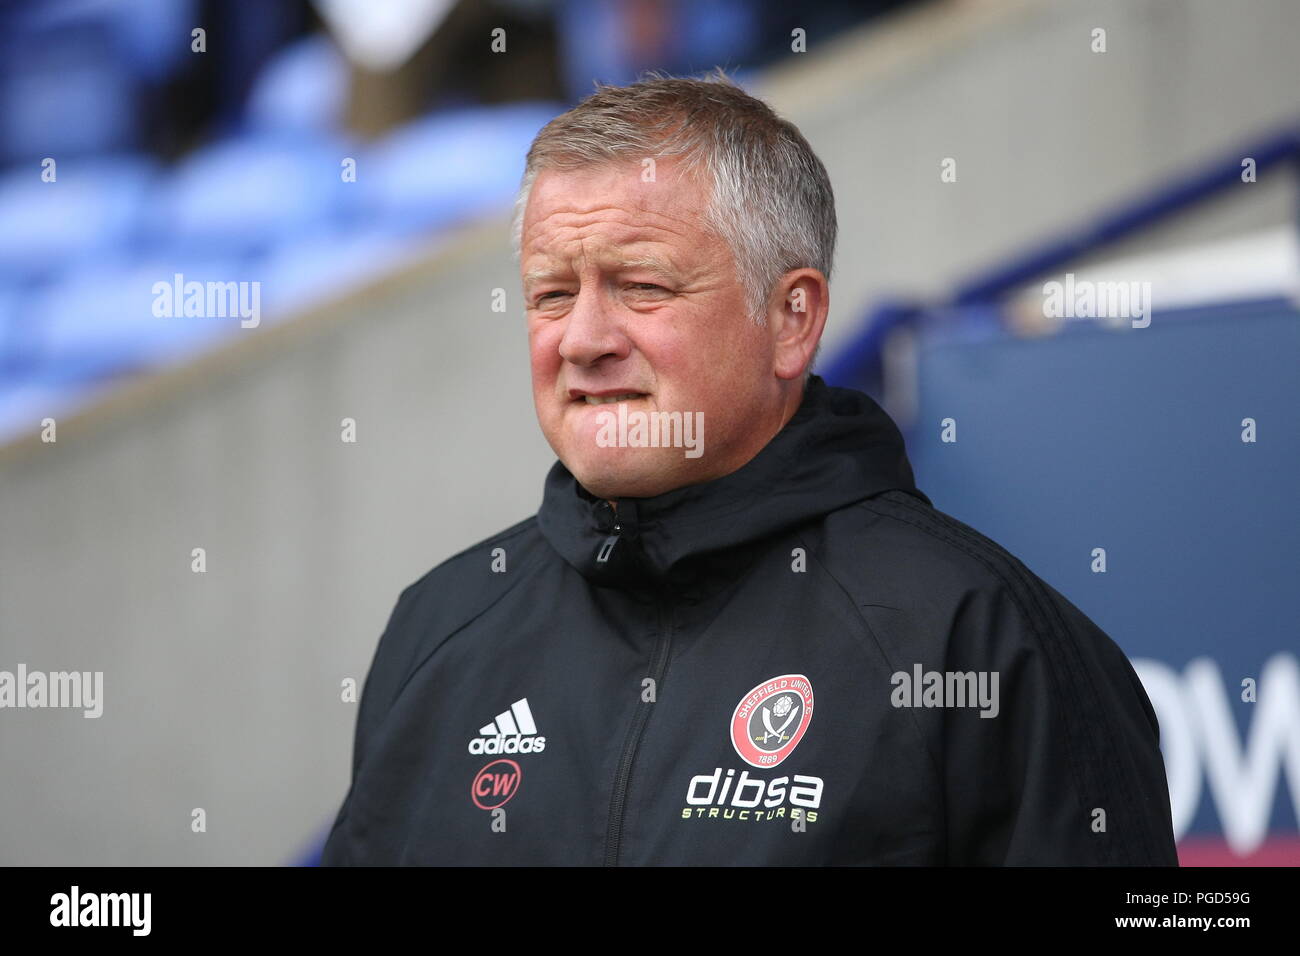 Bolton, Lancashire, UK. 25th August, 2018. Sheffield United Manager Chris Wilder in the dugout ahead of the EFL Championship game Bolton Wanderers v Sheffield United. Credit: Simon Newbury/Alamy Live News Stock Photo